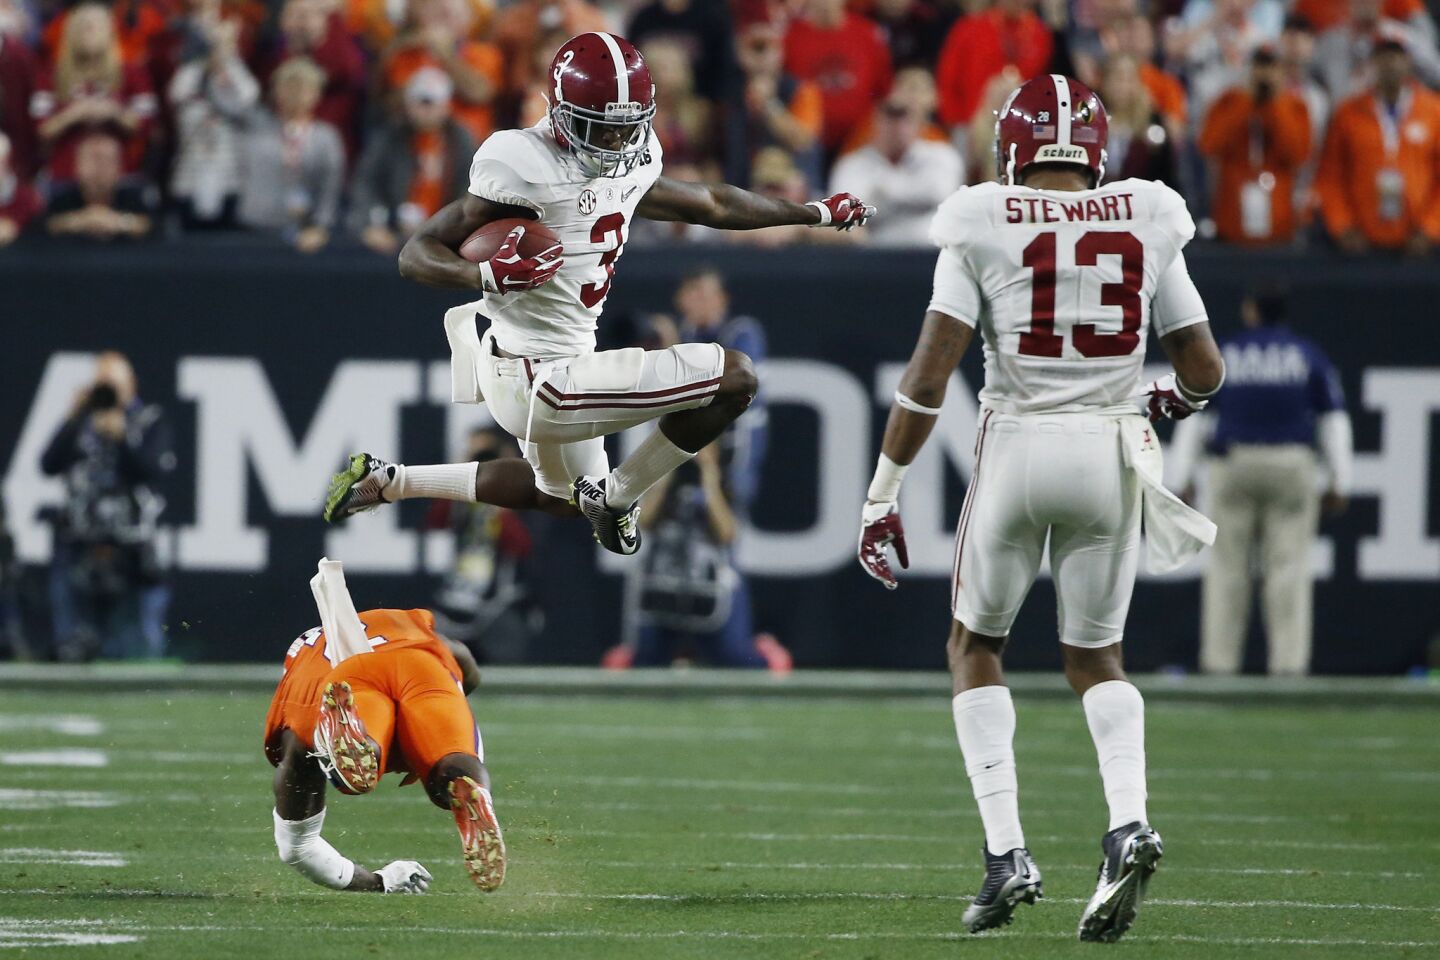 Alabama receiver Calvin Ridley leaps over a Clemson defender in the second quarter.